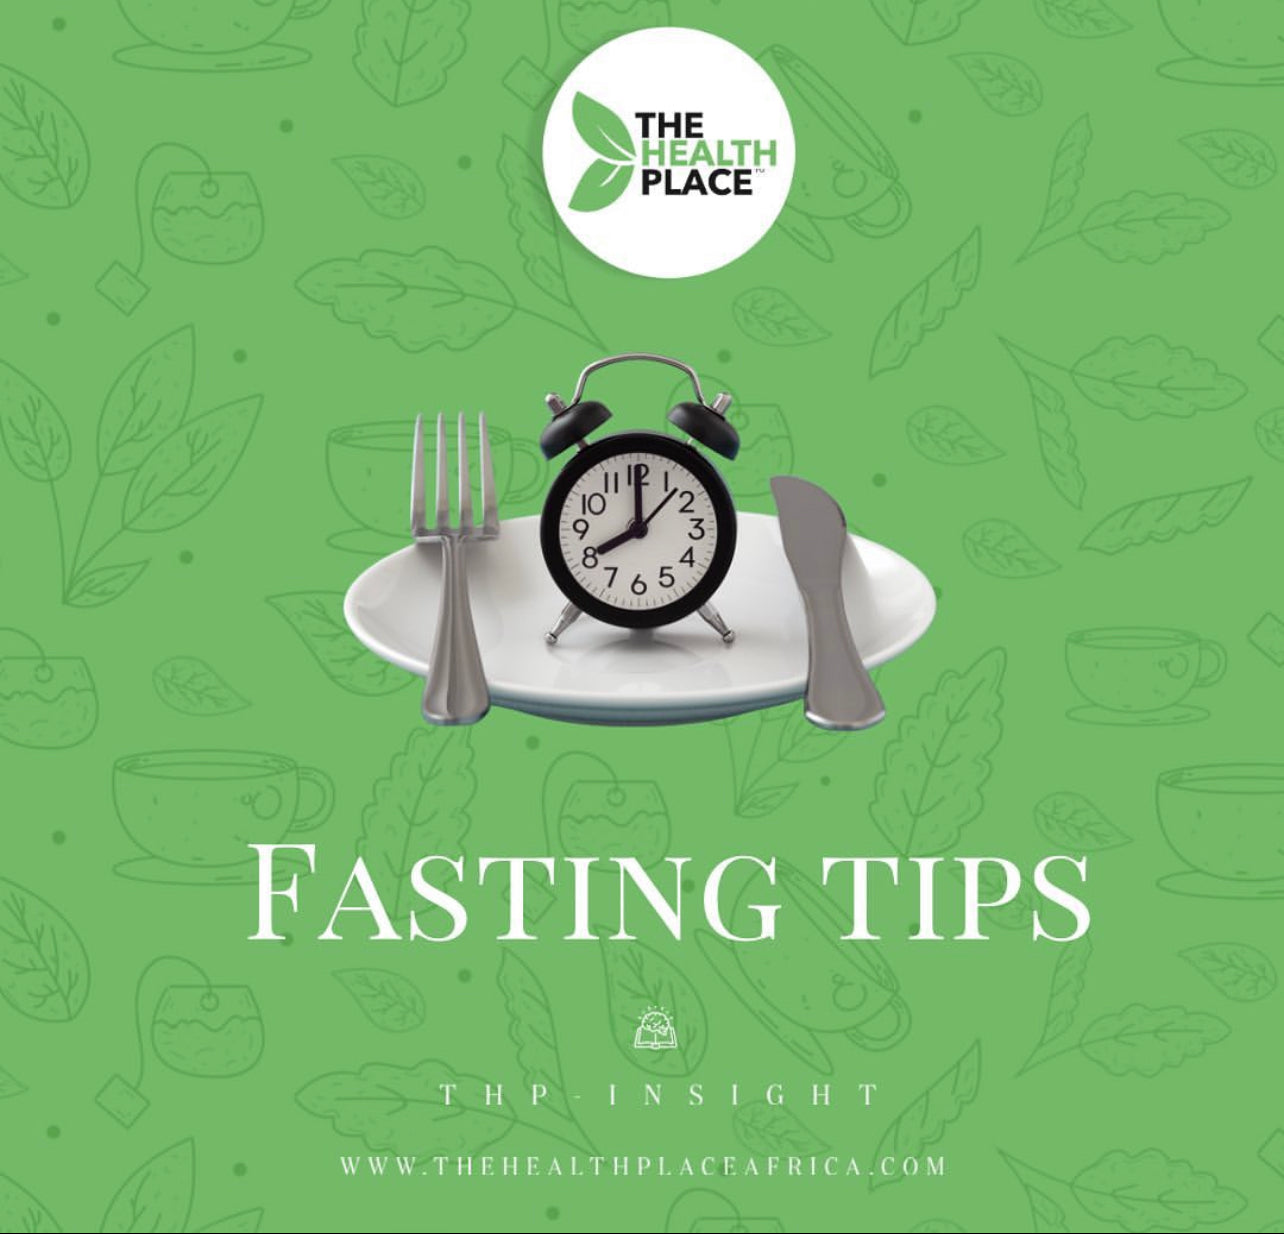 FASTING TIPS